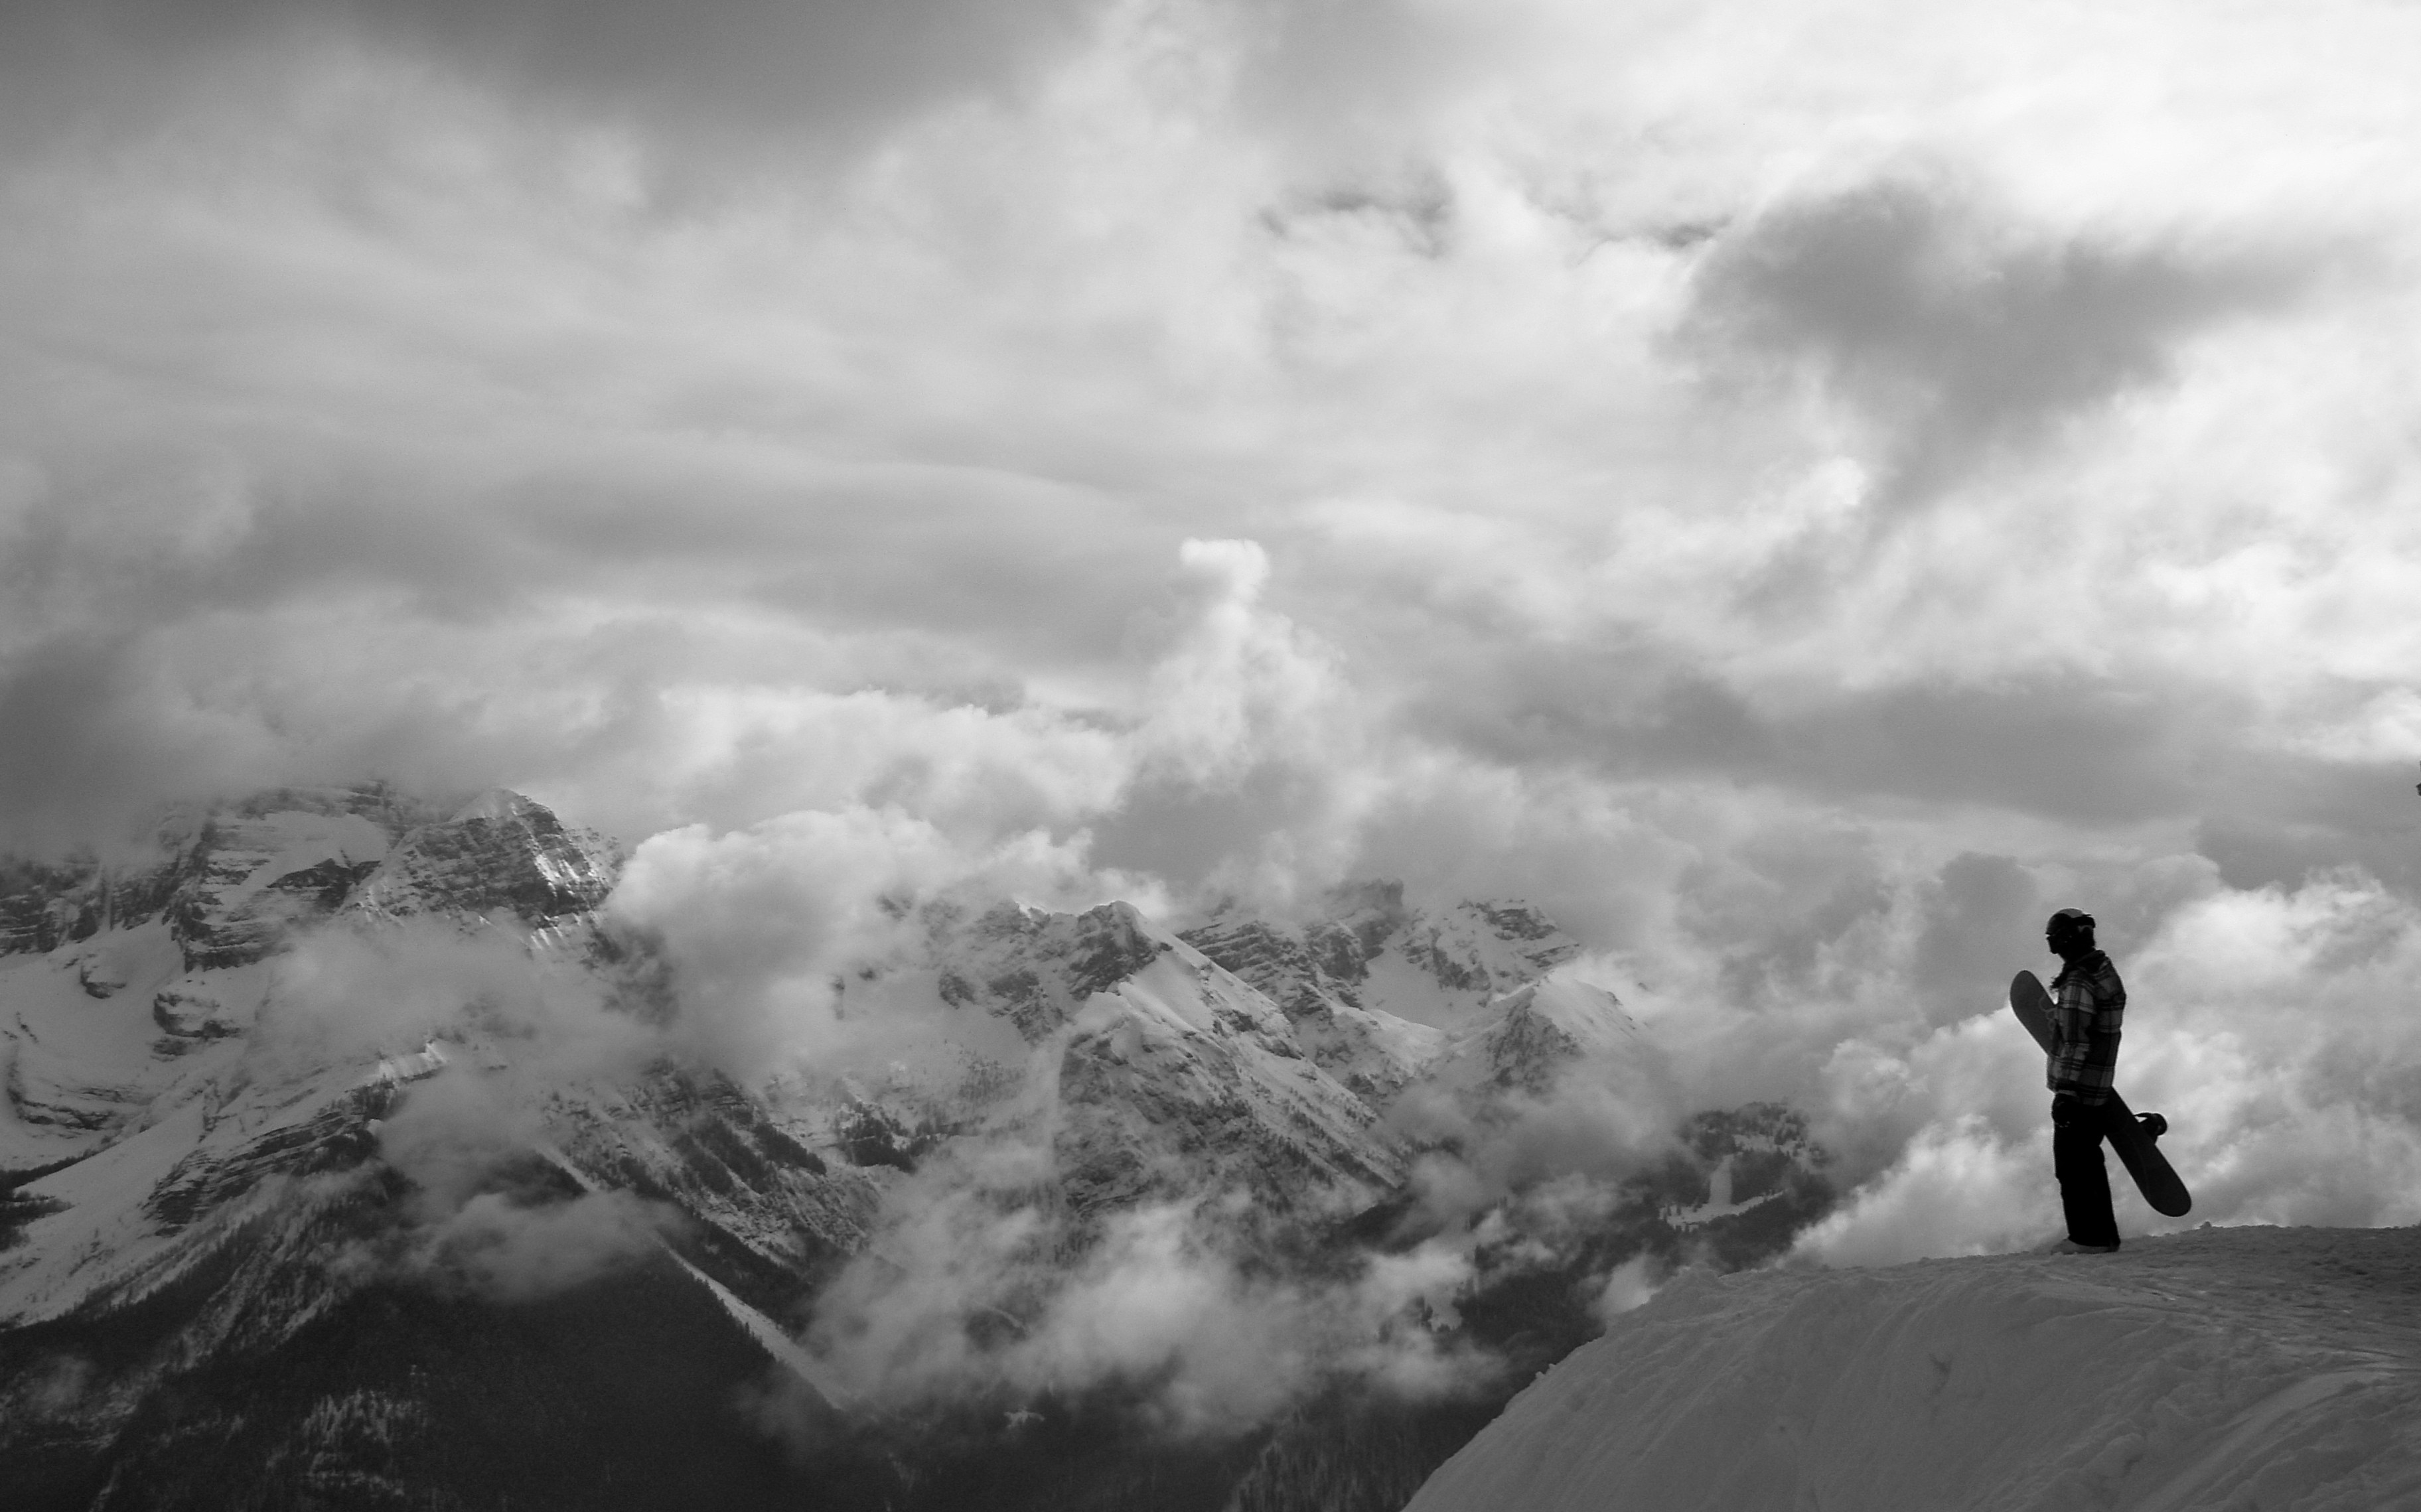 General 3648x2279 mountains clouds snow snowboarding monochrome nature